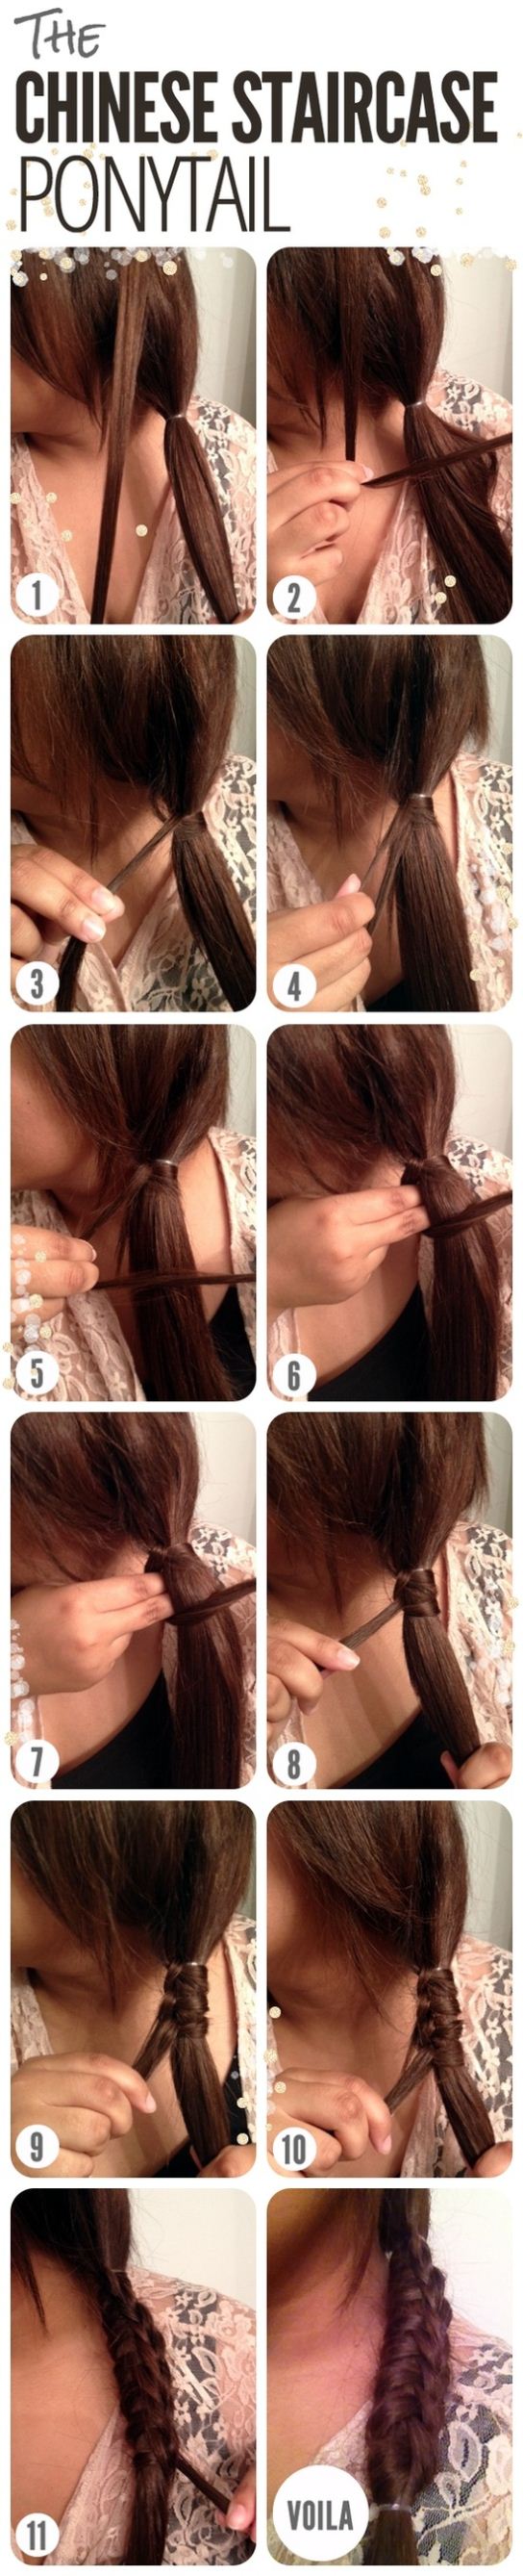 DIY Chinese staircase ponytail hairstyle over